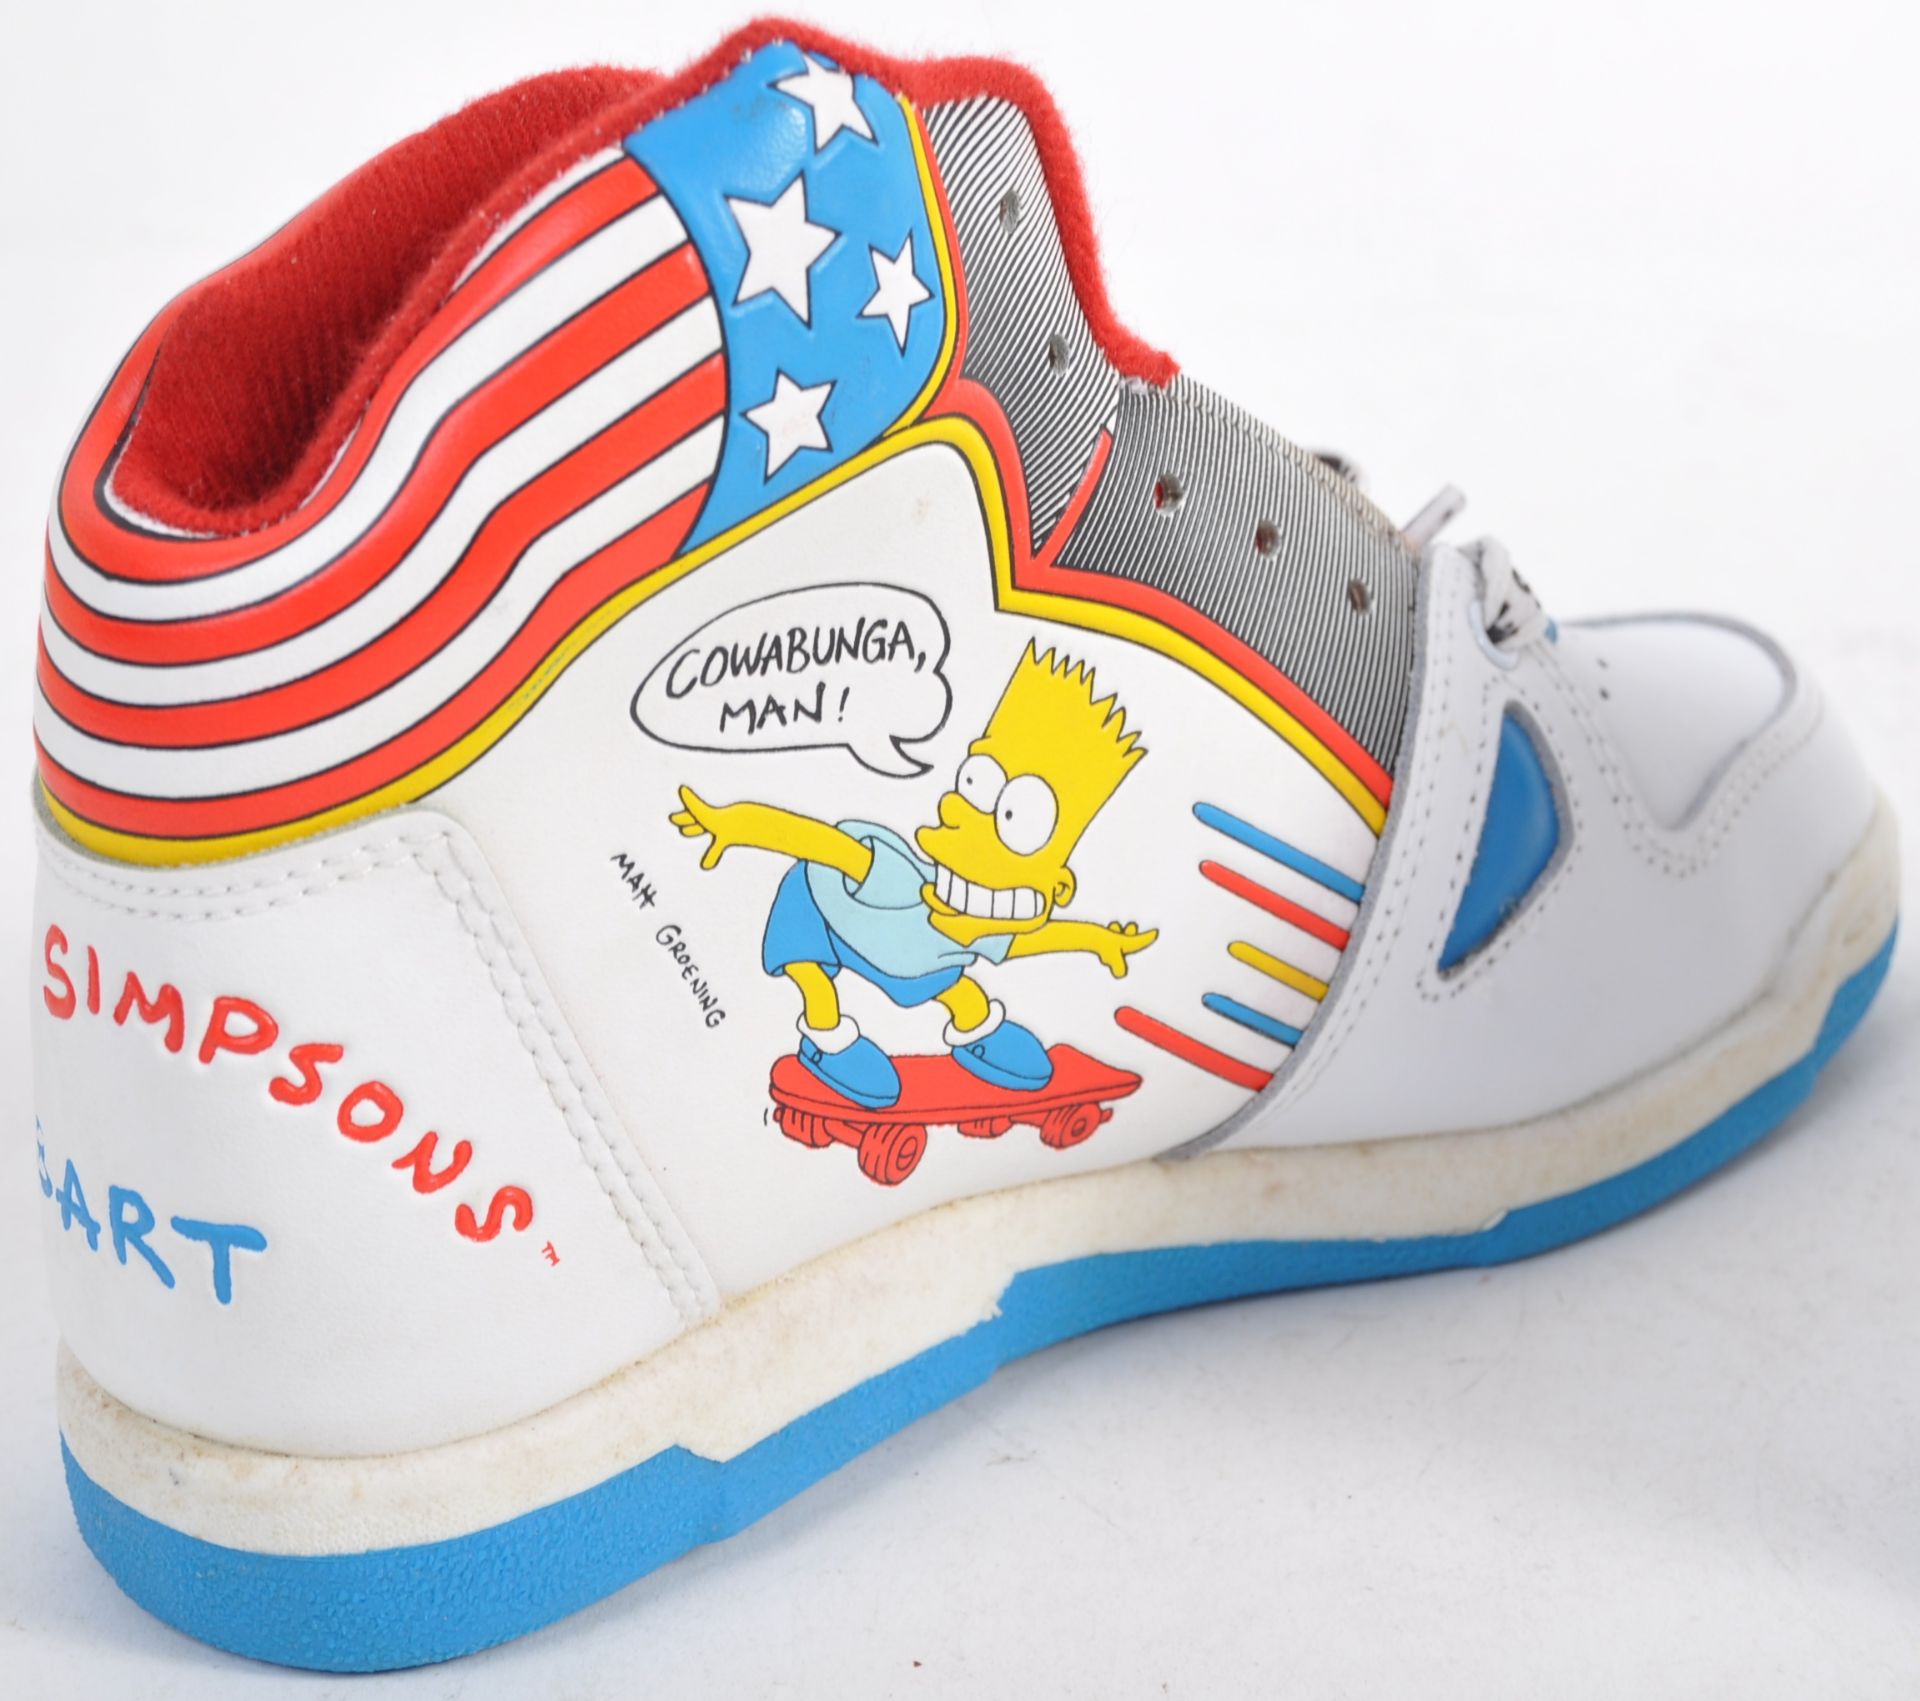 PAIR OF ORIGINAL VINTAGE BART SIMPSONS ' BART BOOT ' TRAINERS - Image 4 of 7